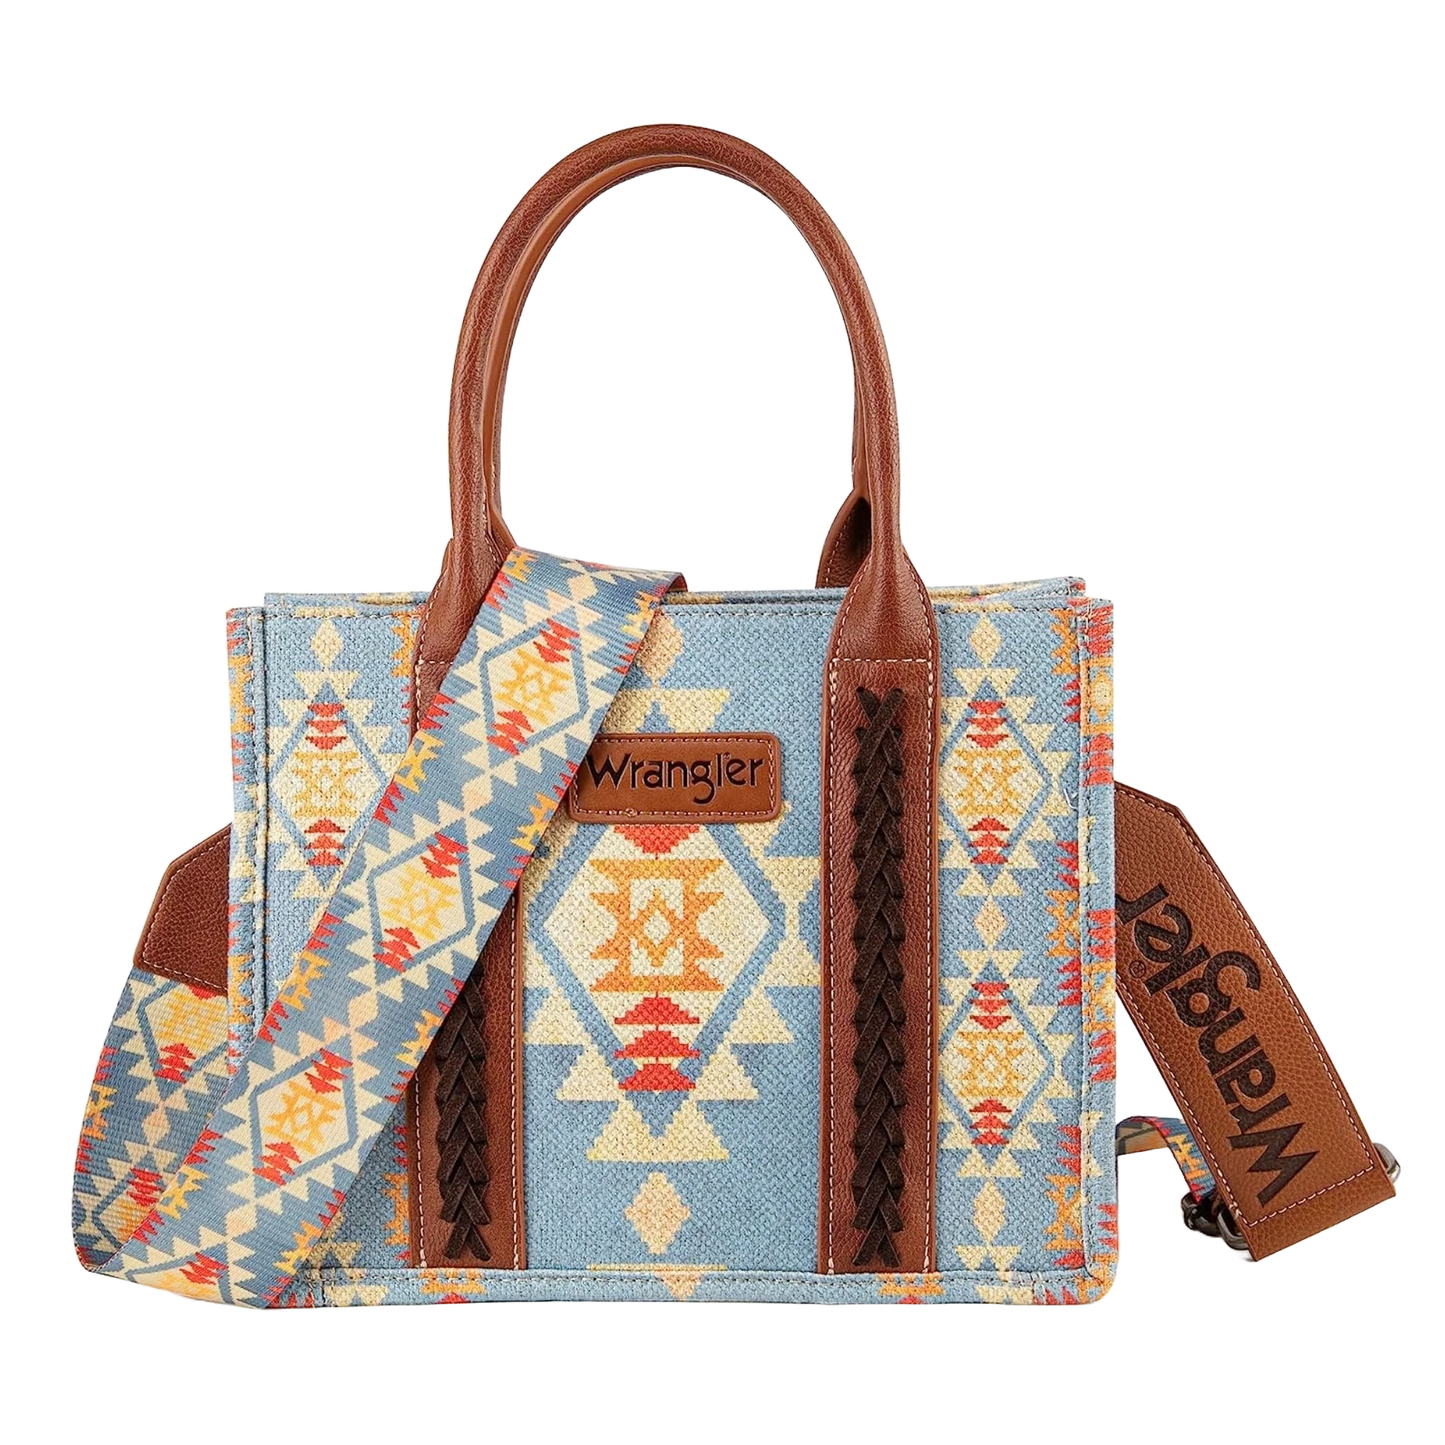 Women's Real Wild West Tote Bag